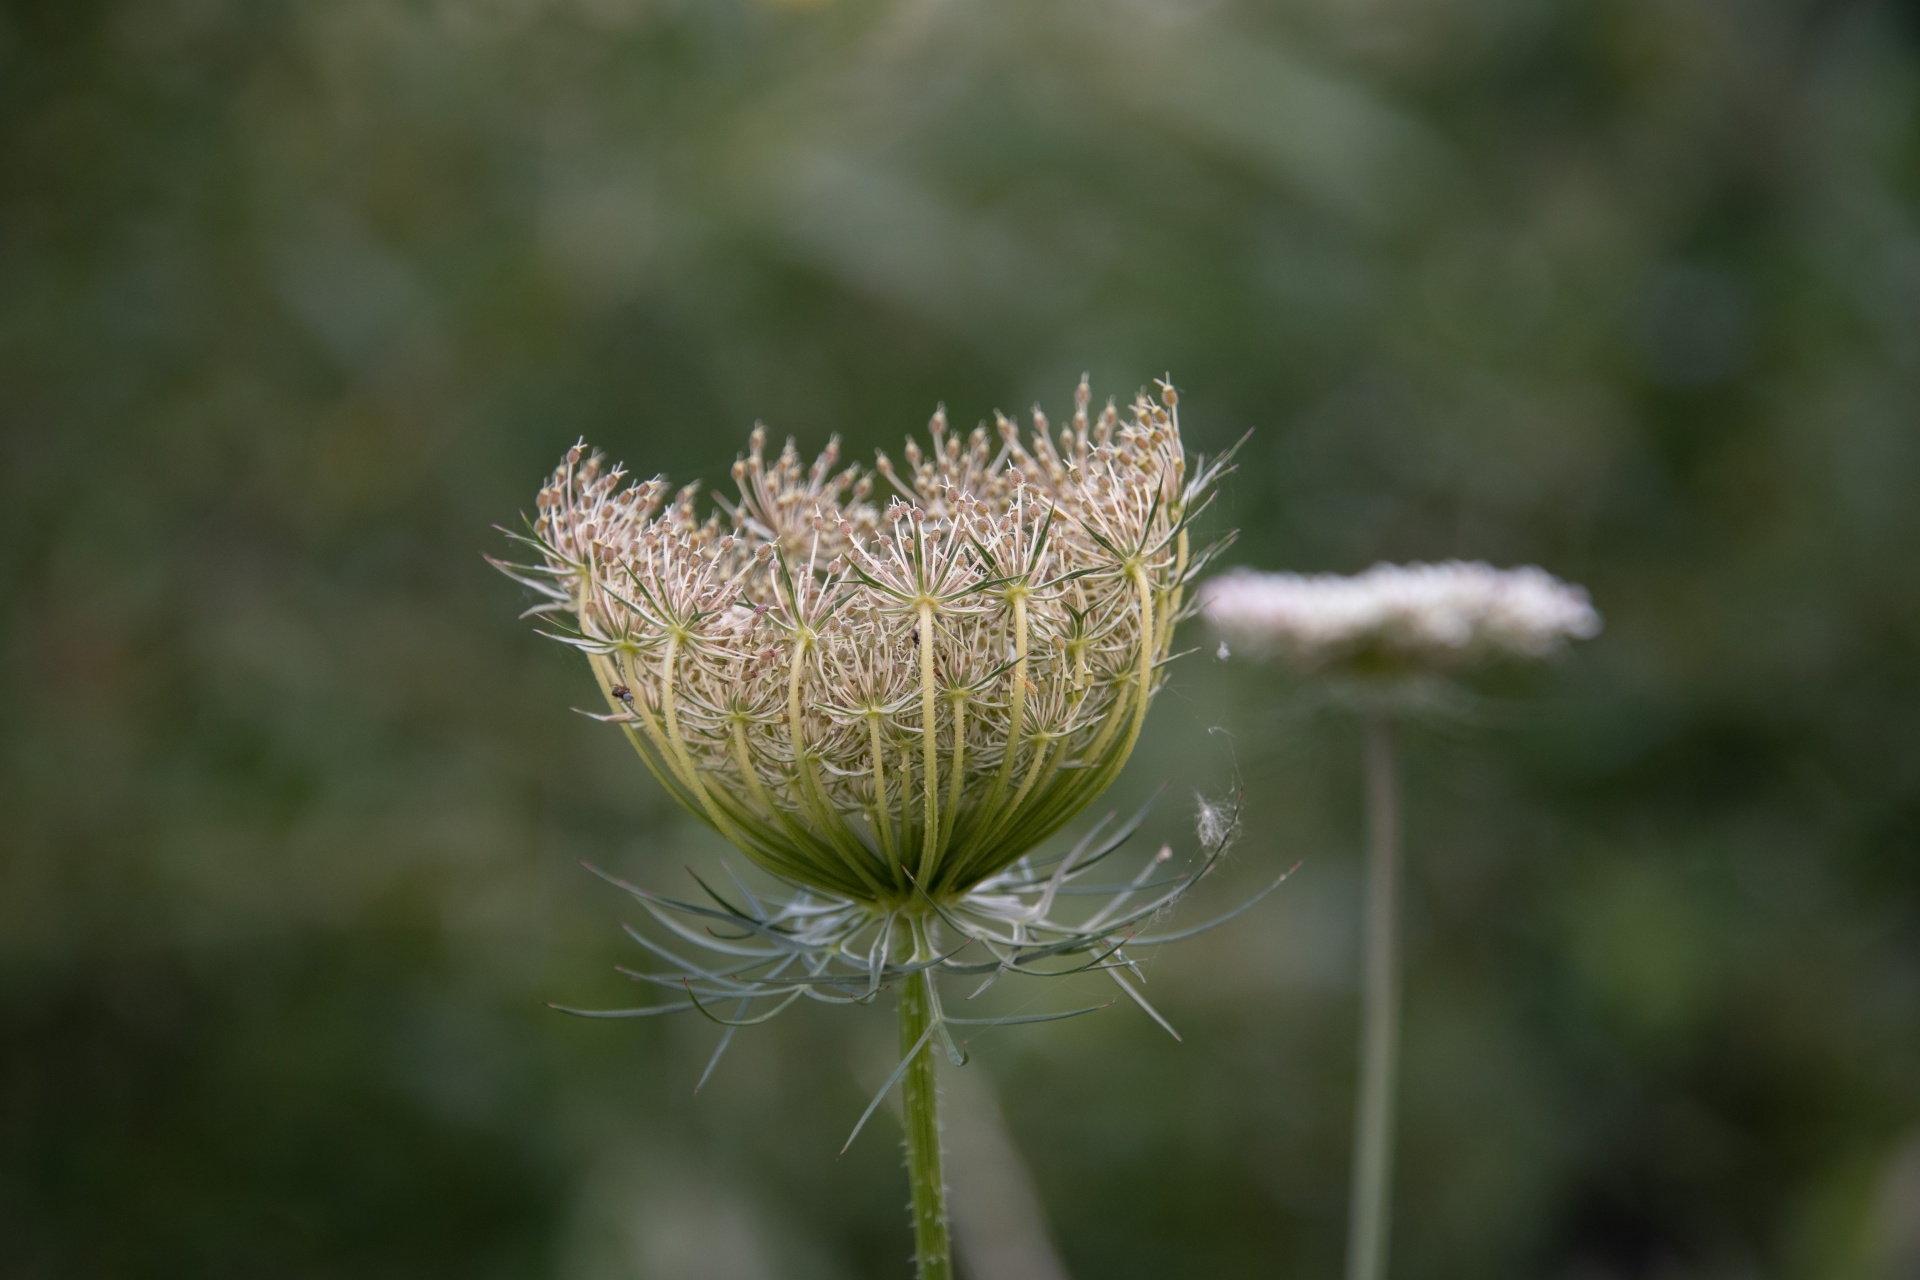 a wild carrot in close-up on a dark background